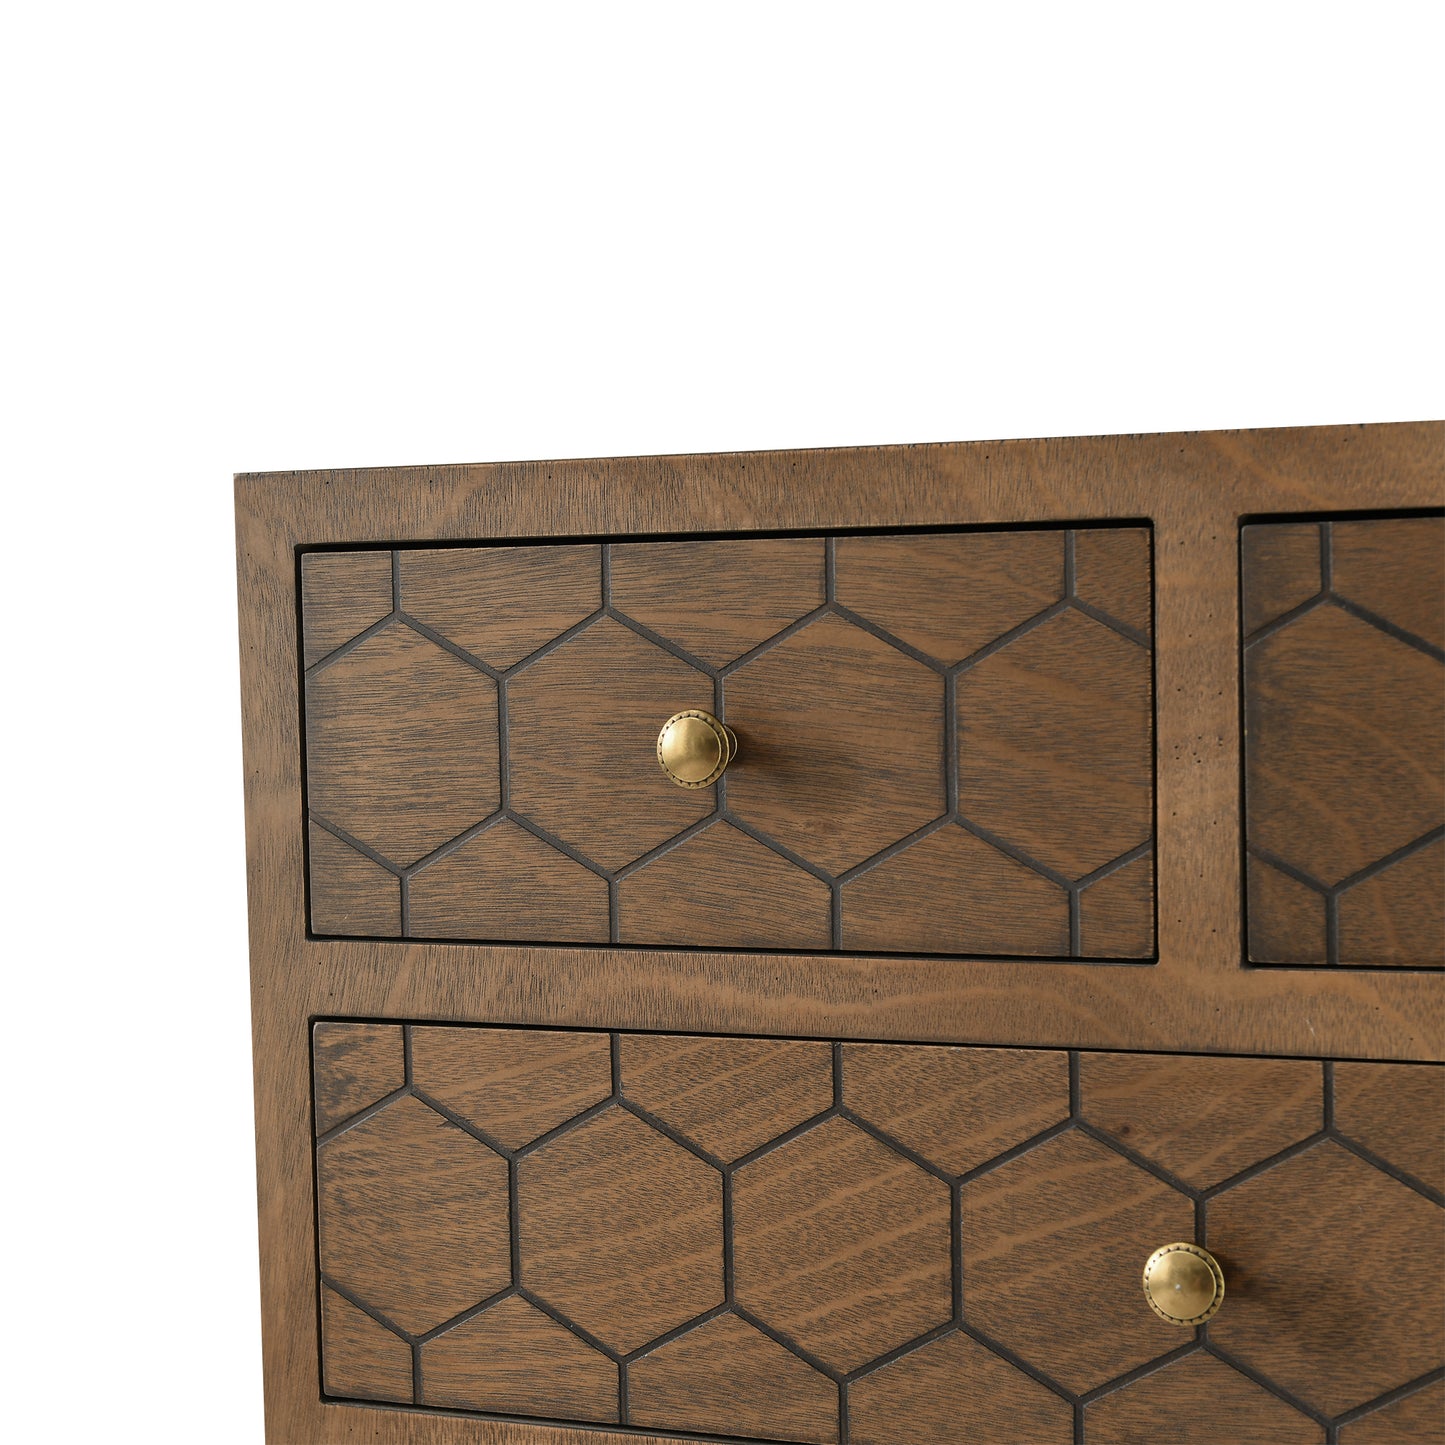 Handcrafted Accent Drawer with Abstract Carvings - Premium MDF Construction - 5 Drawers for Stylish Storage - Natural Wood Veneer - No Assembly Required